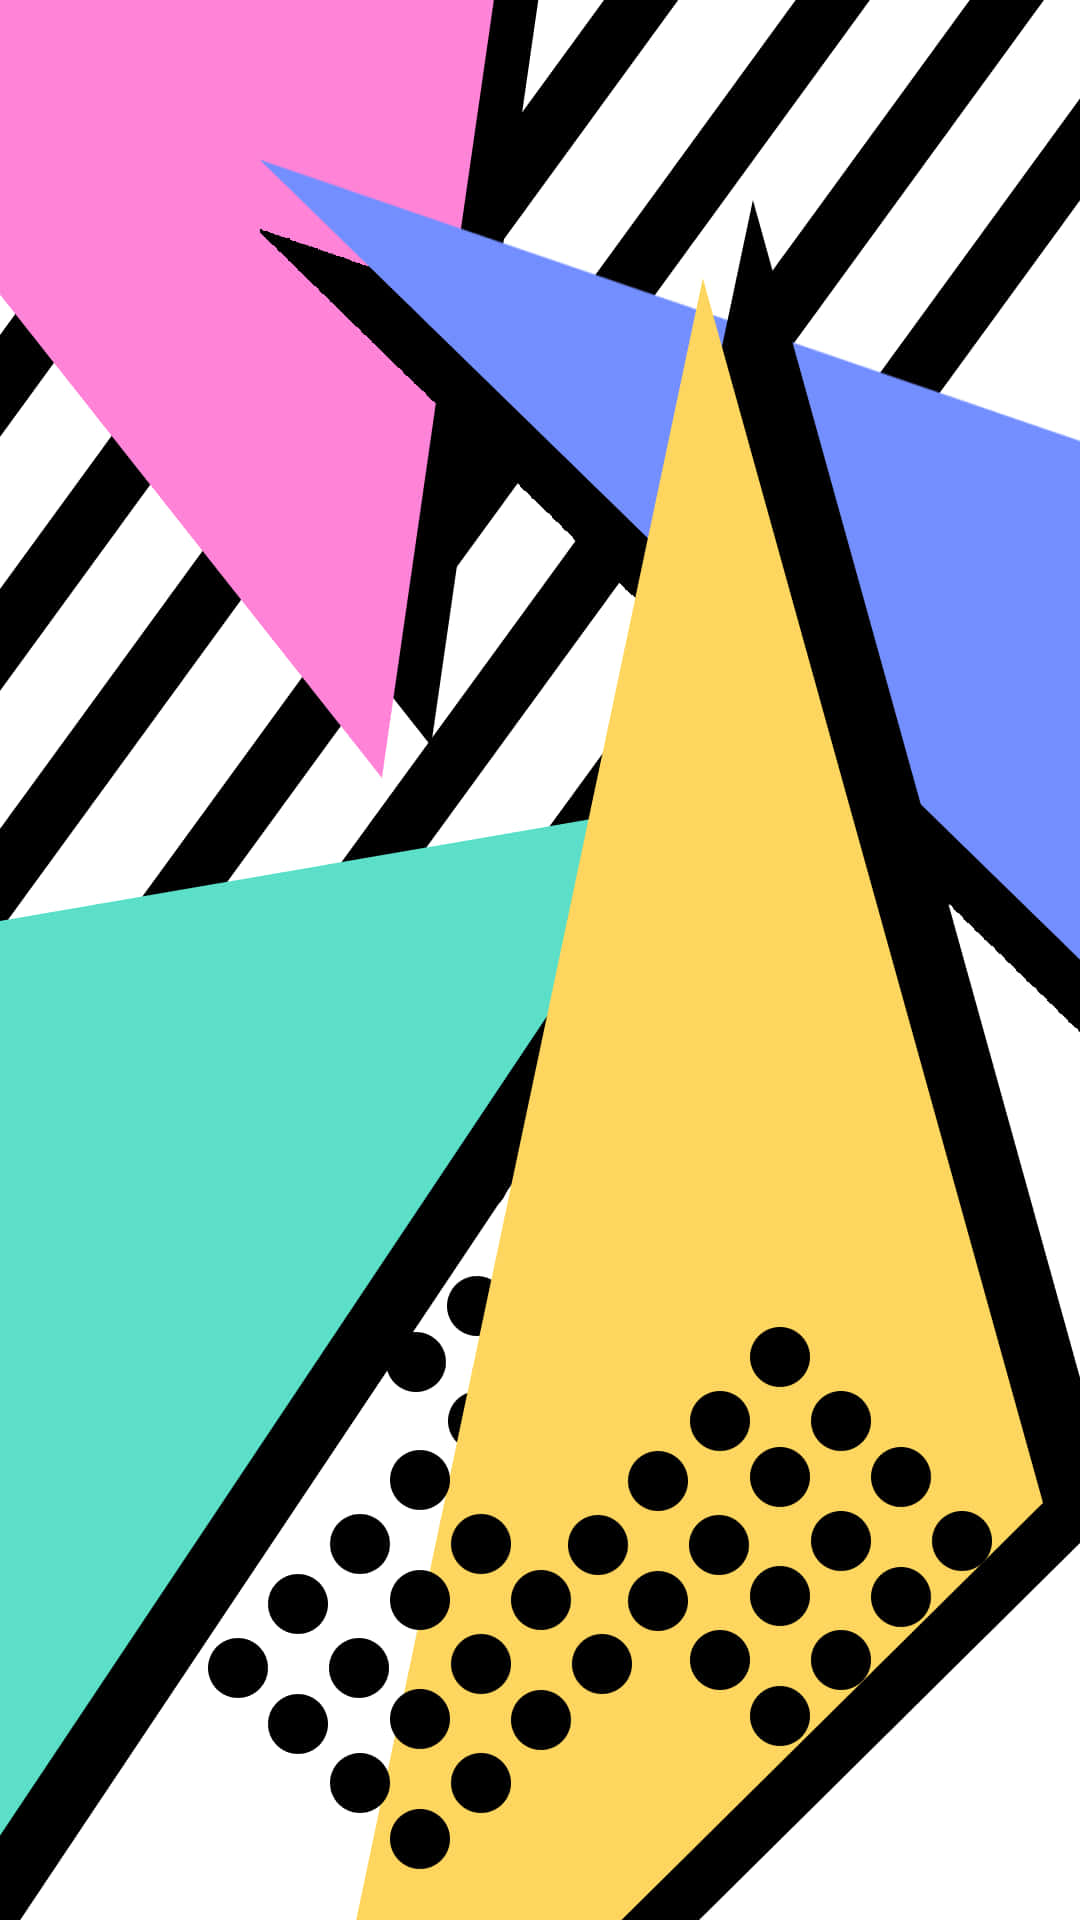 A Colorful Abstract Design With Triangles And Dots